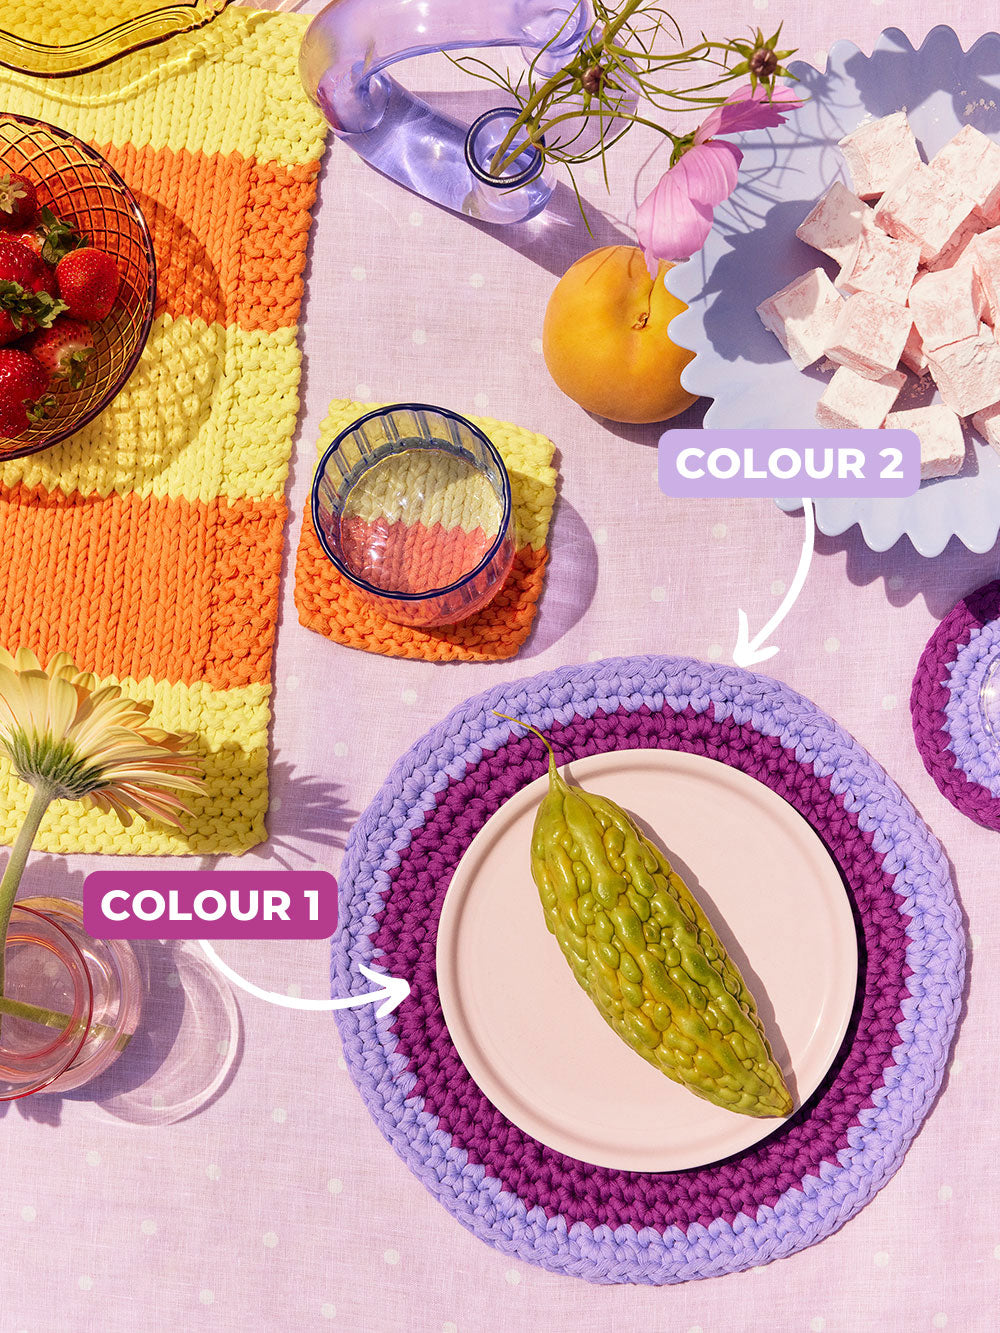 A photo indicating which colour is colour 1, and which colour is colour 2 for the isla rochet placemat and coaster set kit